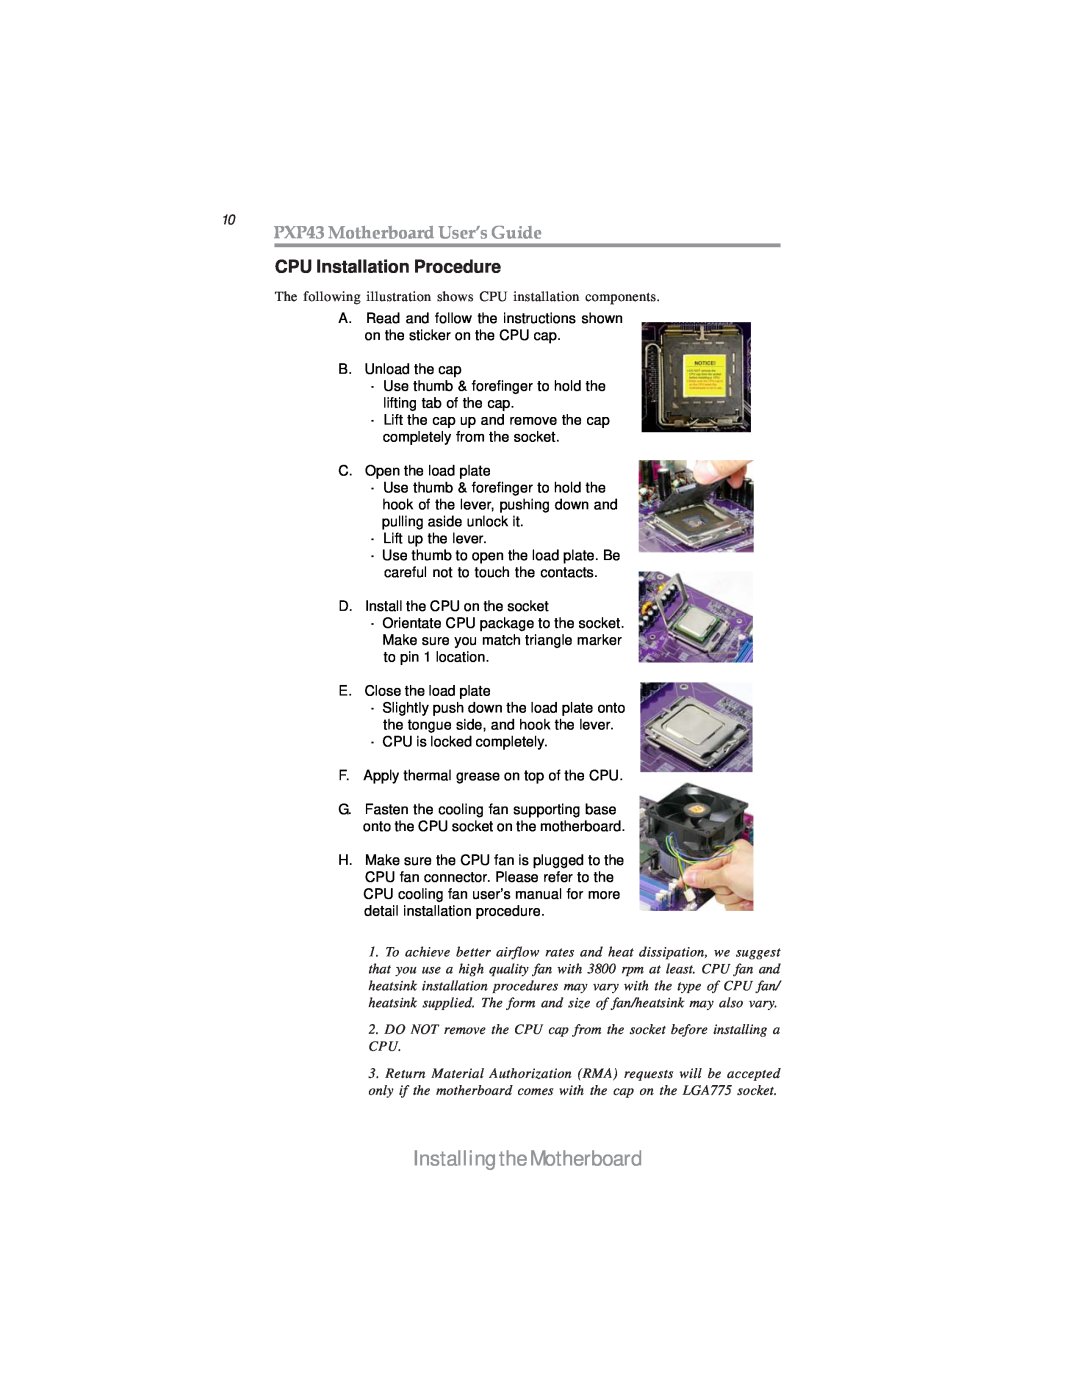 Microsoft manual 10 PXP43 Motherboard User’s Guide, CPU Installation Procedure, Installing the Motherboard 